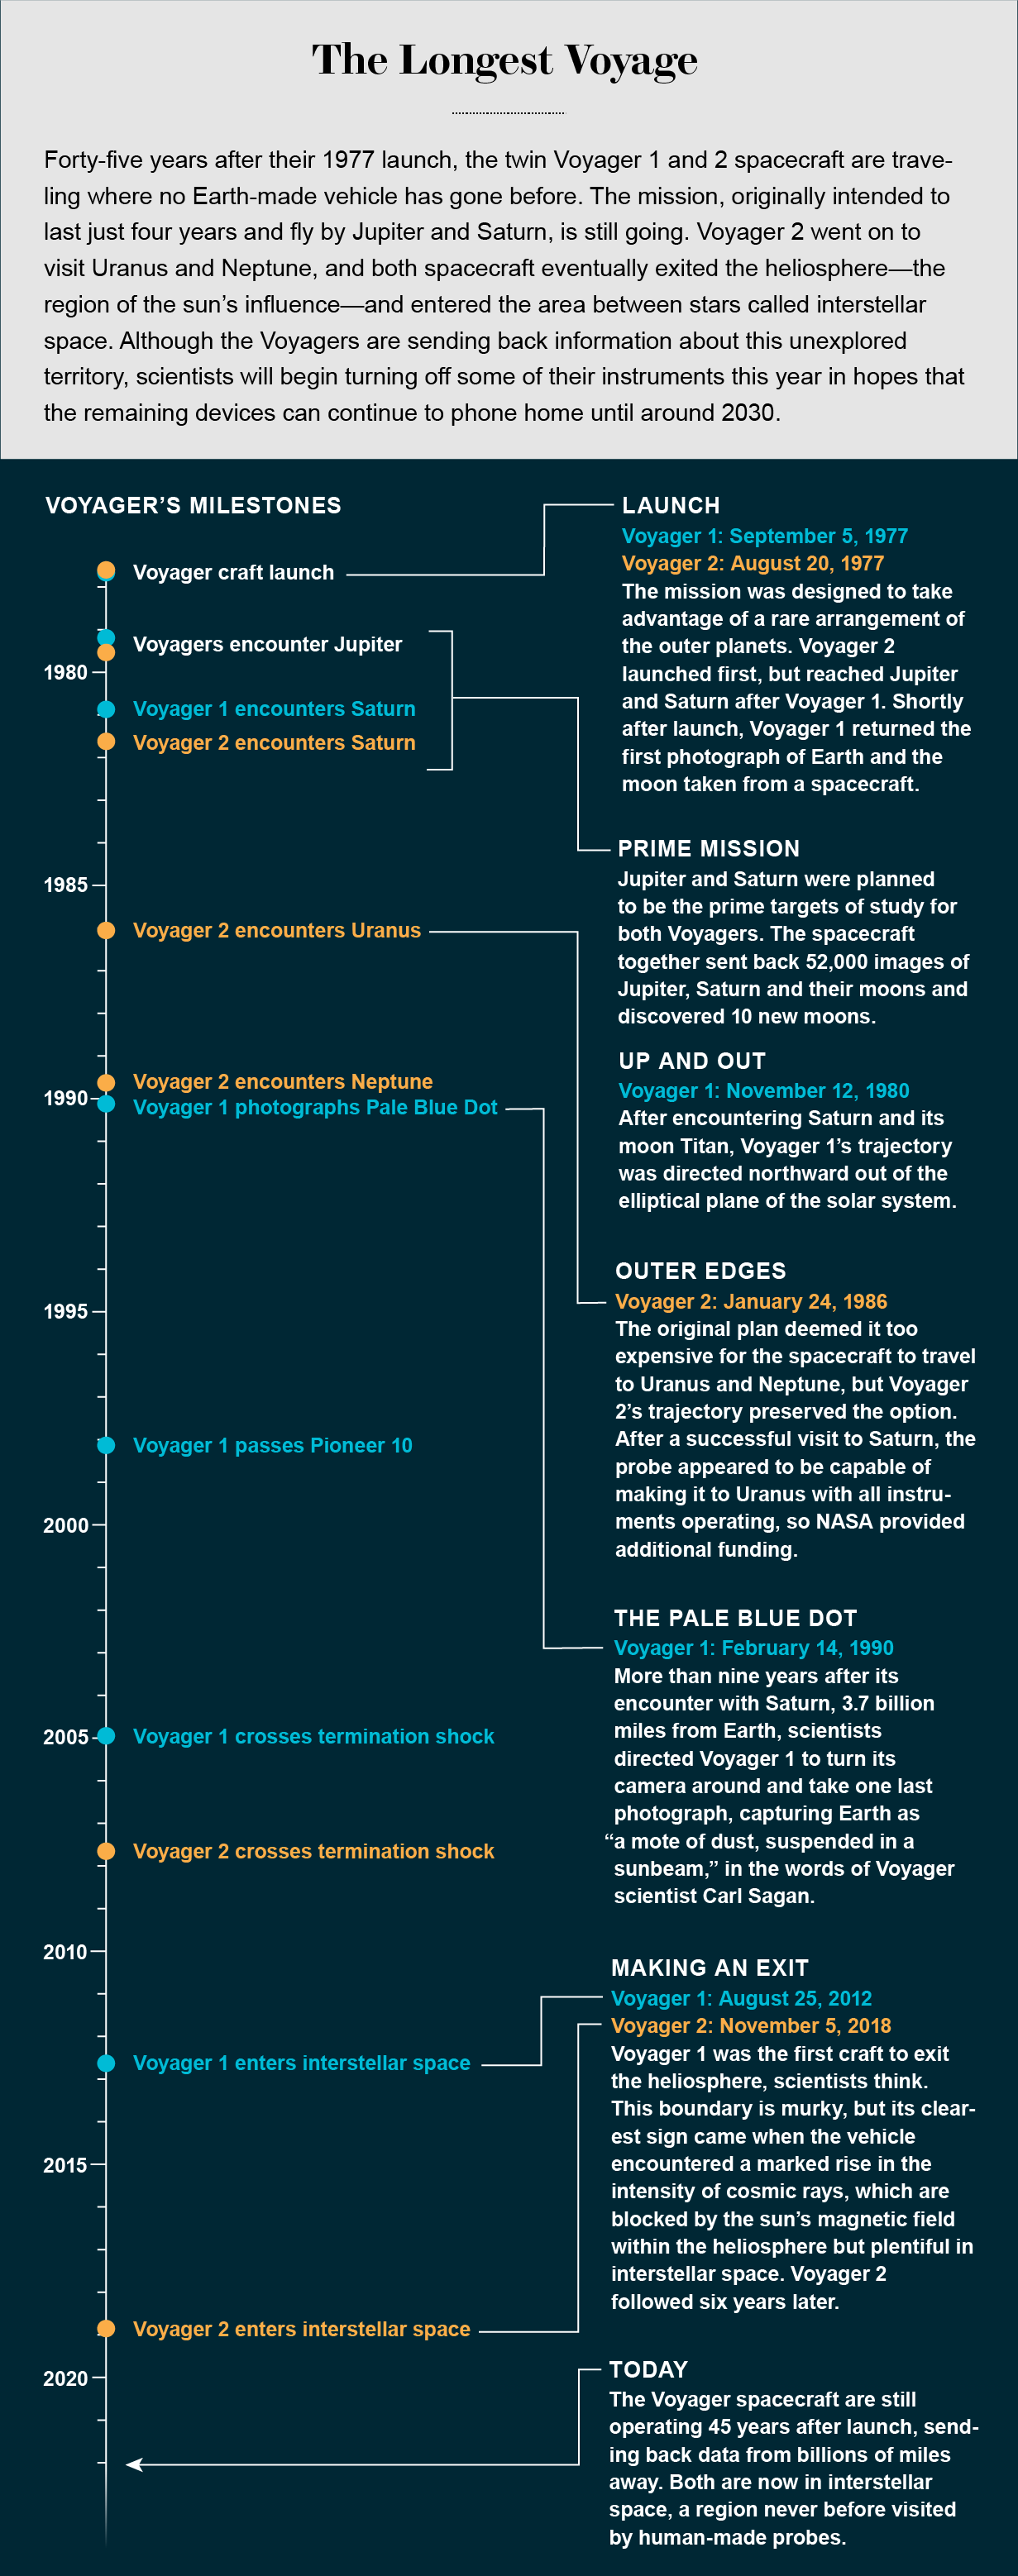 Voyager 1 and 2 milestone time line, from launch in 1977 to planet encounters and interstellar space entry (2012 and 2018).